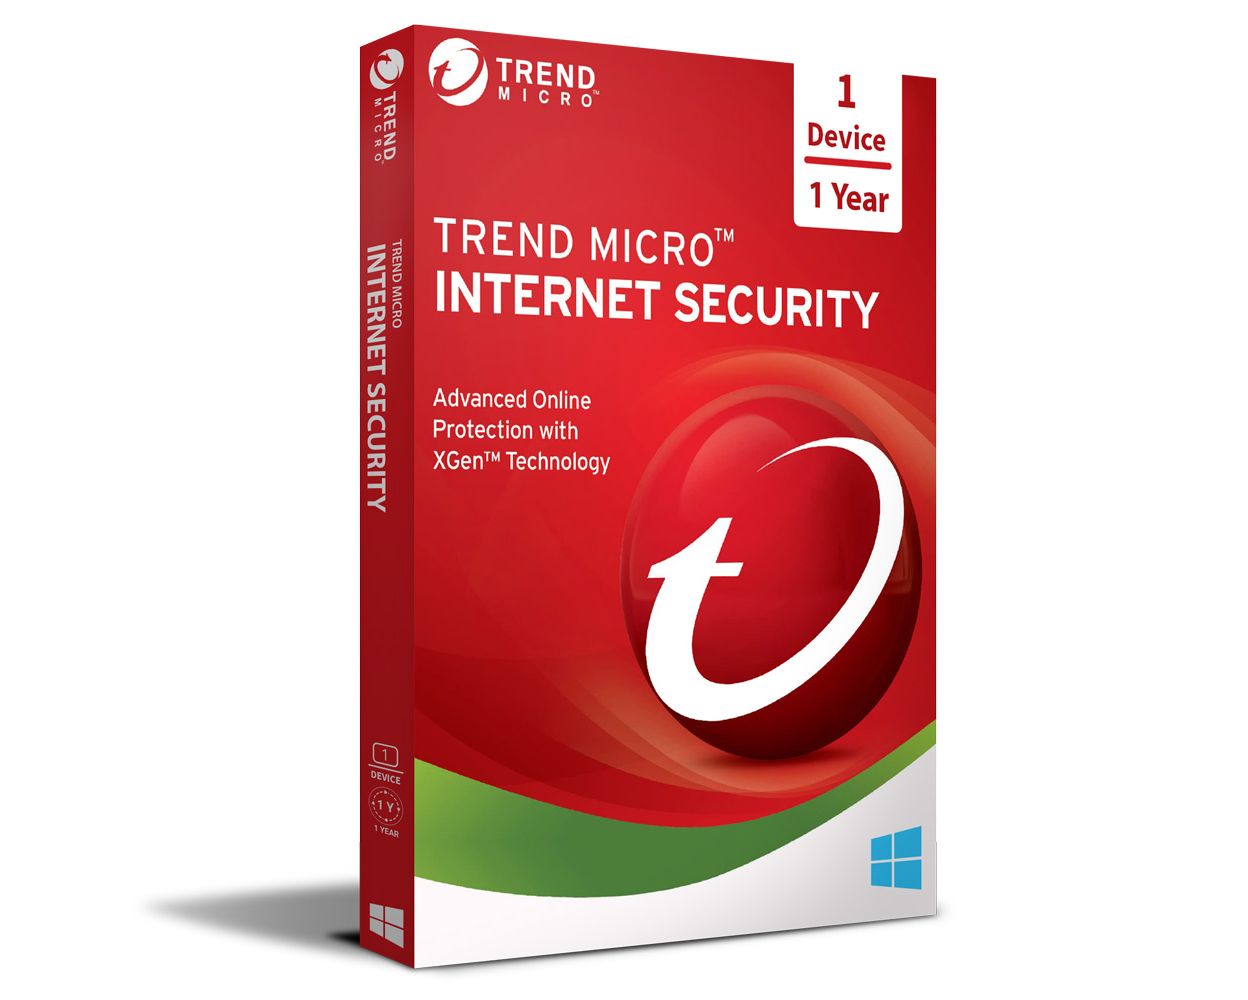 trend micro internet security installing an update